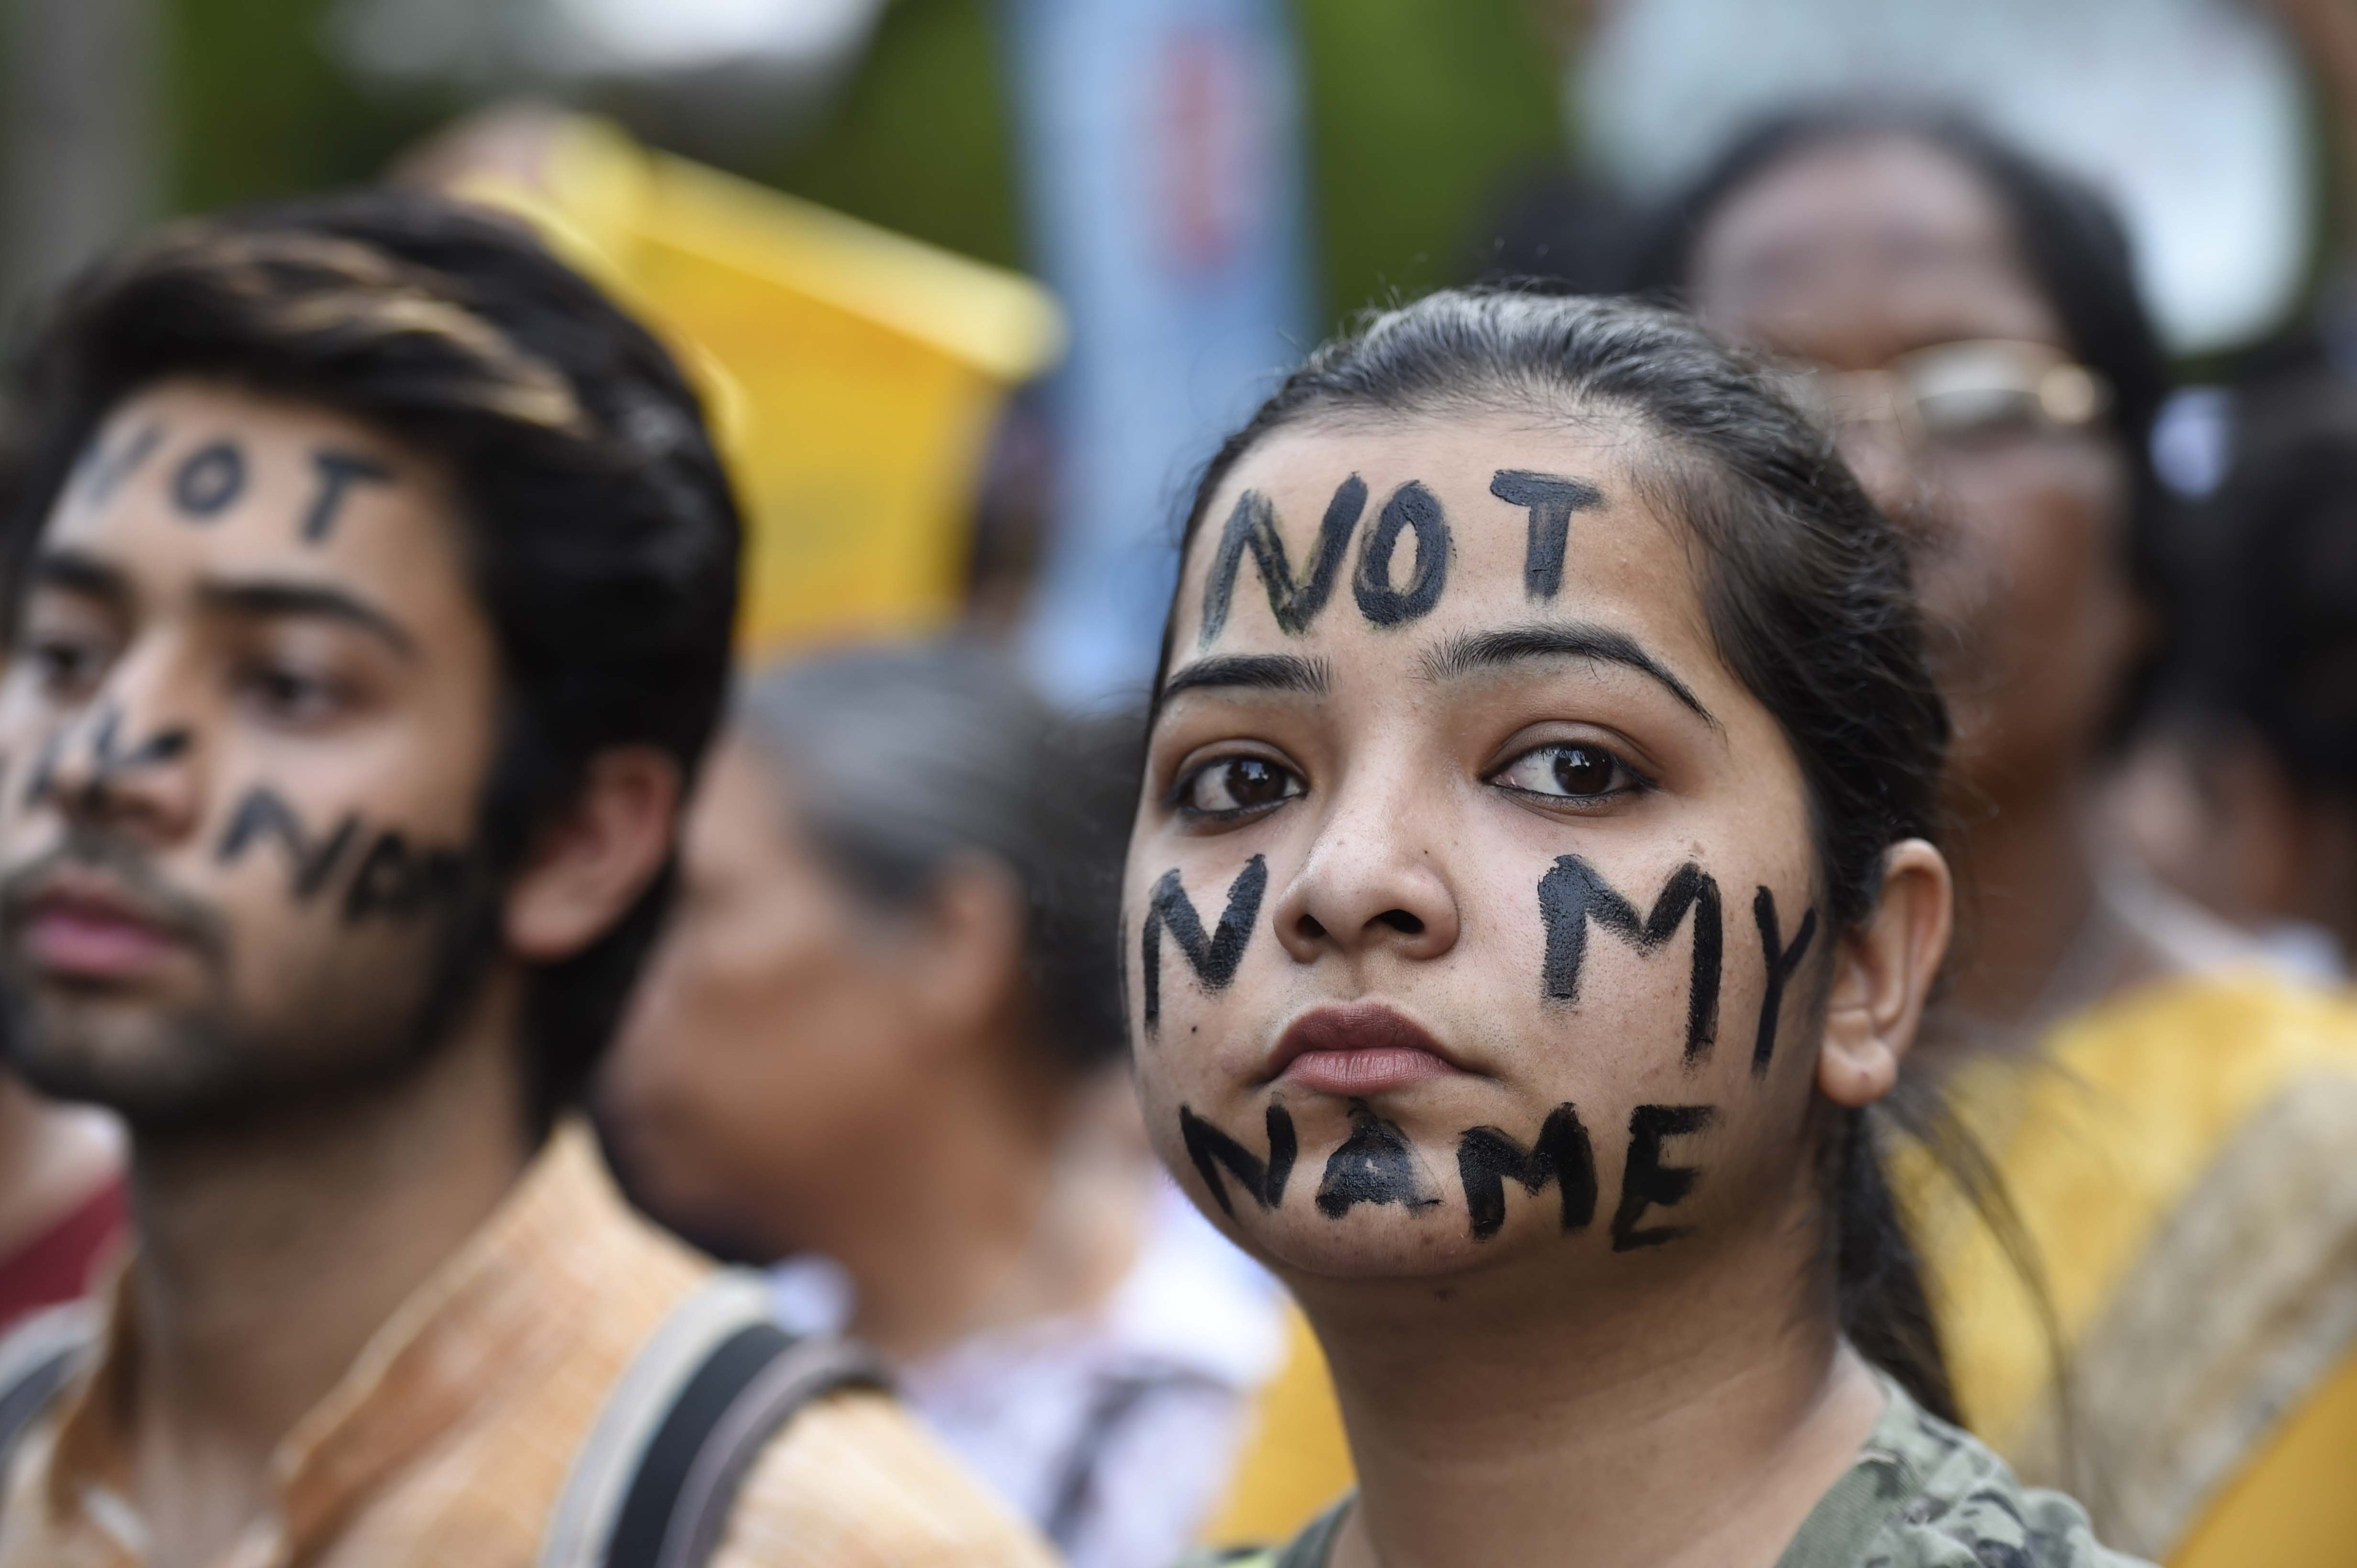 People take part in a 'Not In My Name' protest against the Kathua and Unnao rape cases, New Delhi, April 15, 2018. (Arvind Yadav—Hindustan Times/Getty Images)